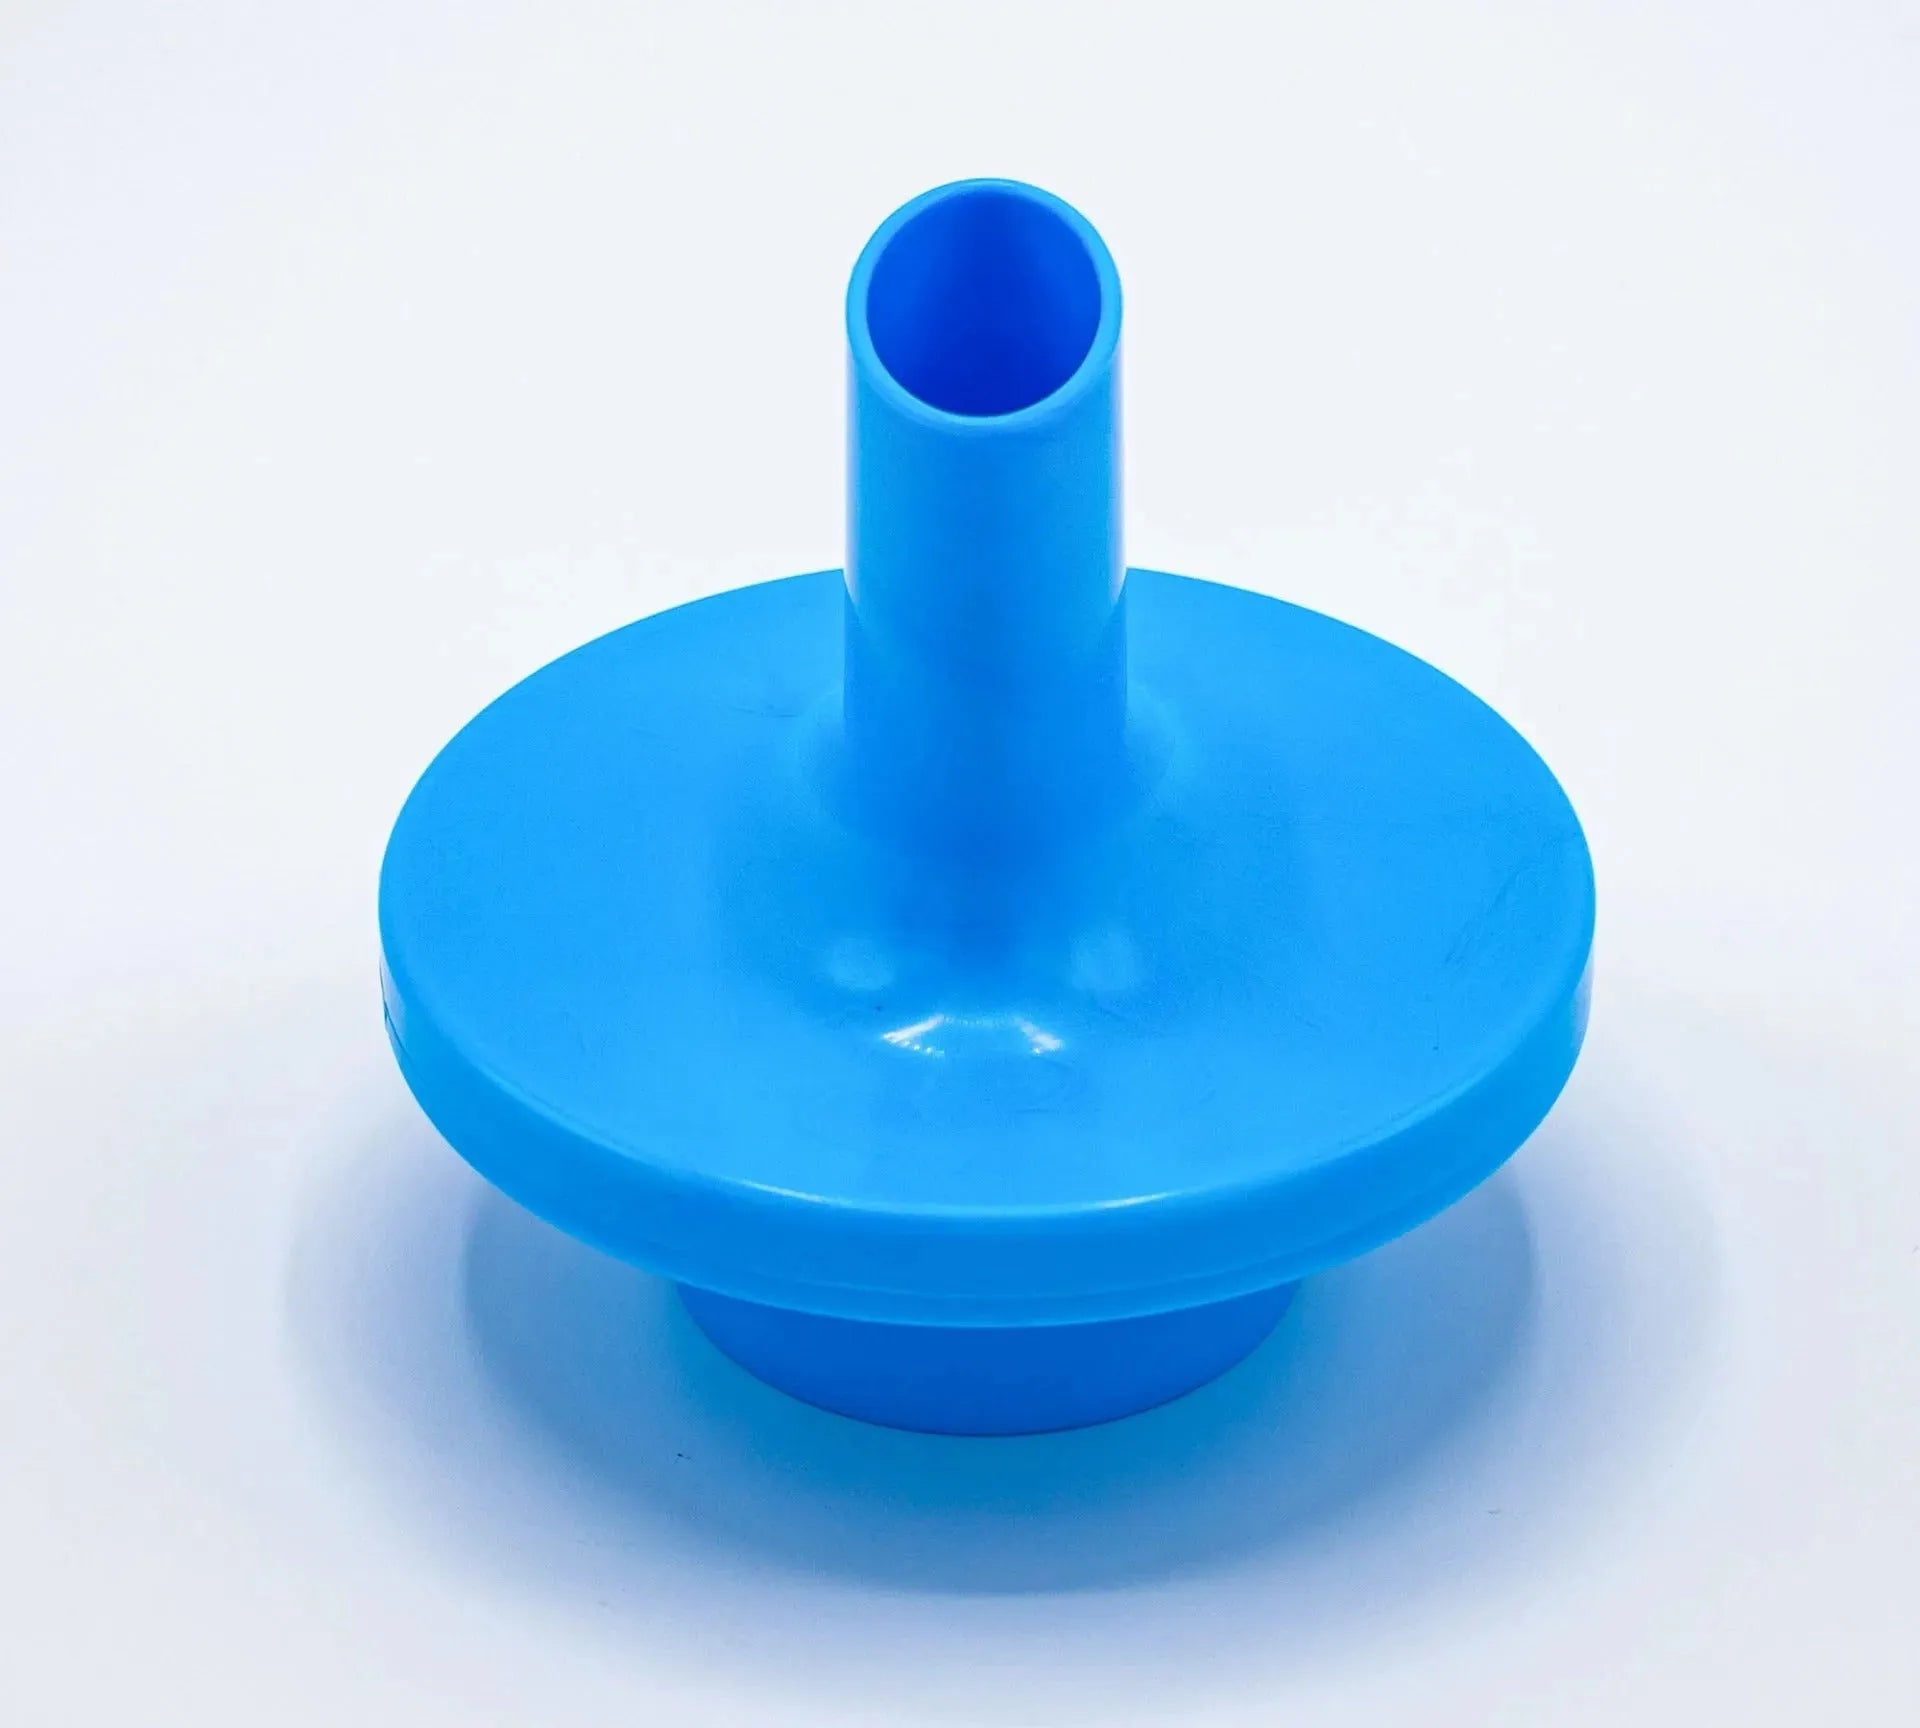 The Elliptical bacterial filter mouthpiece is elliptical in shape and blue in color.